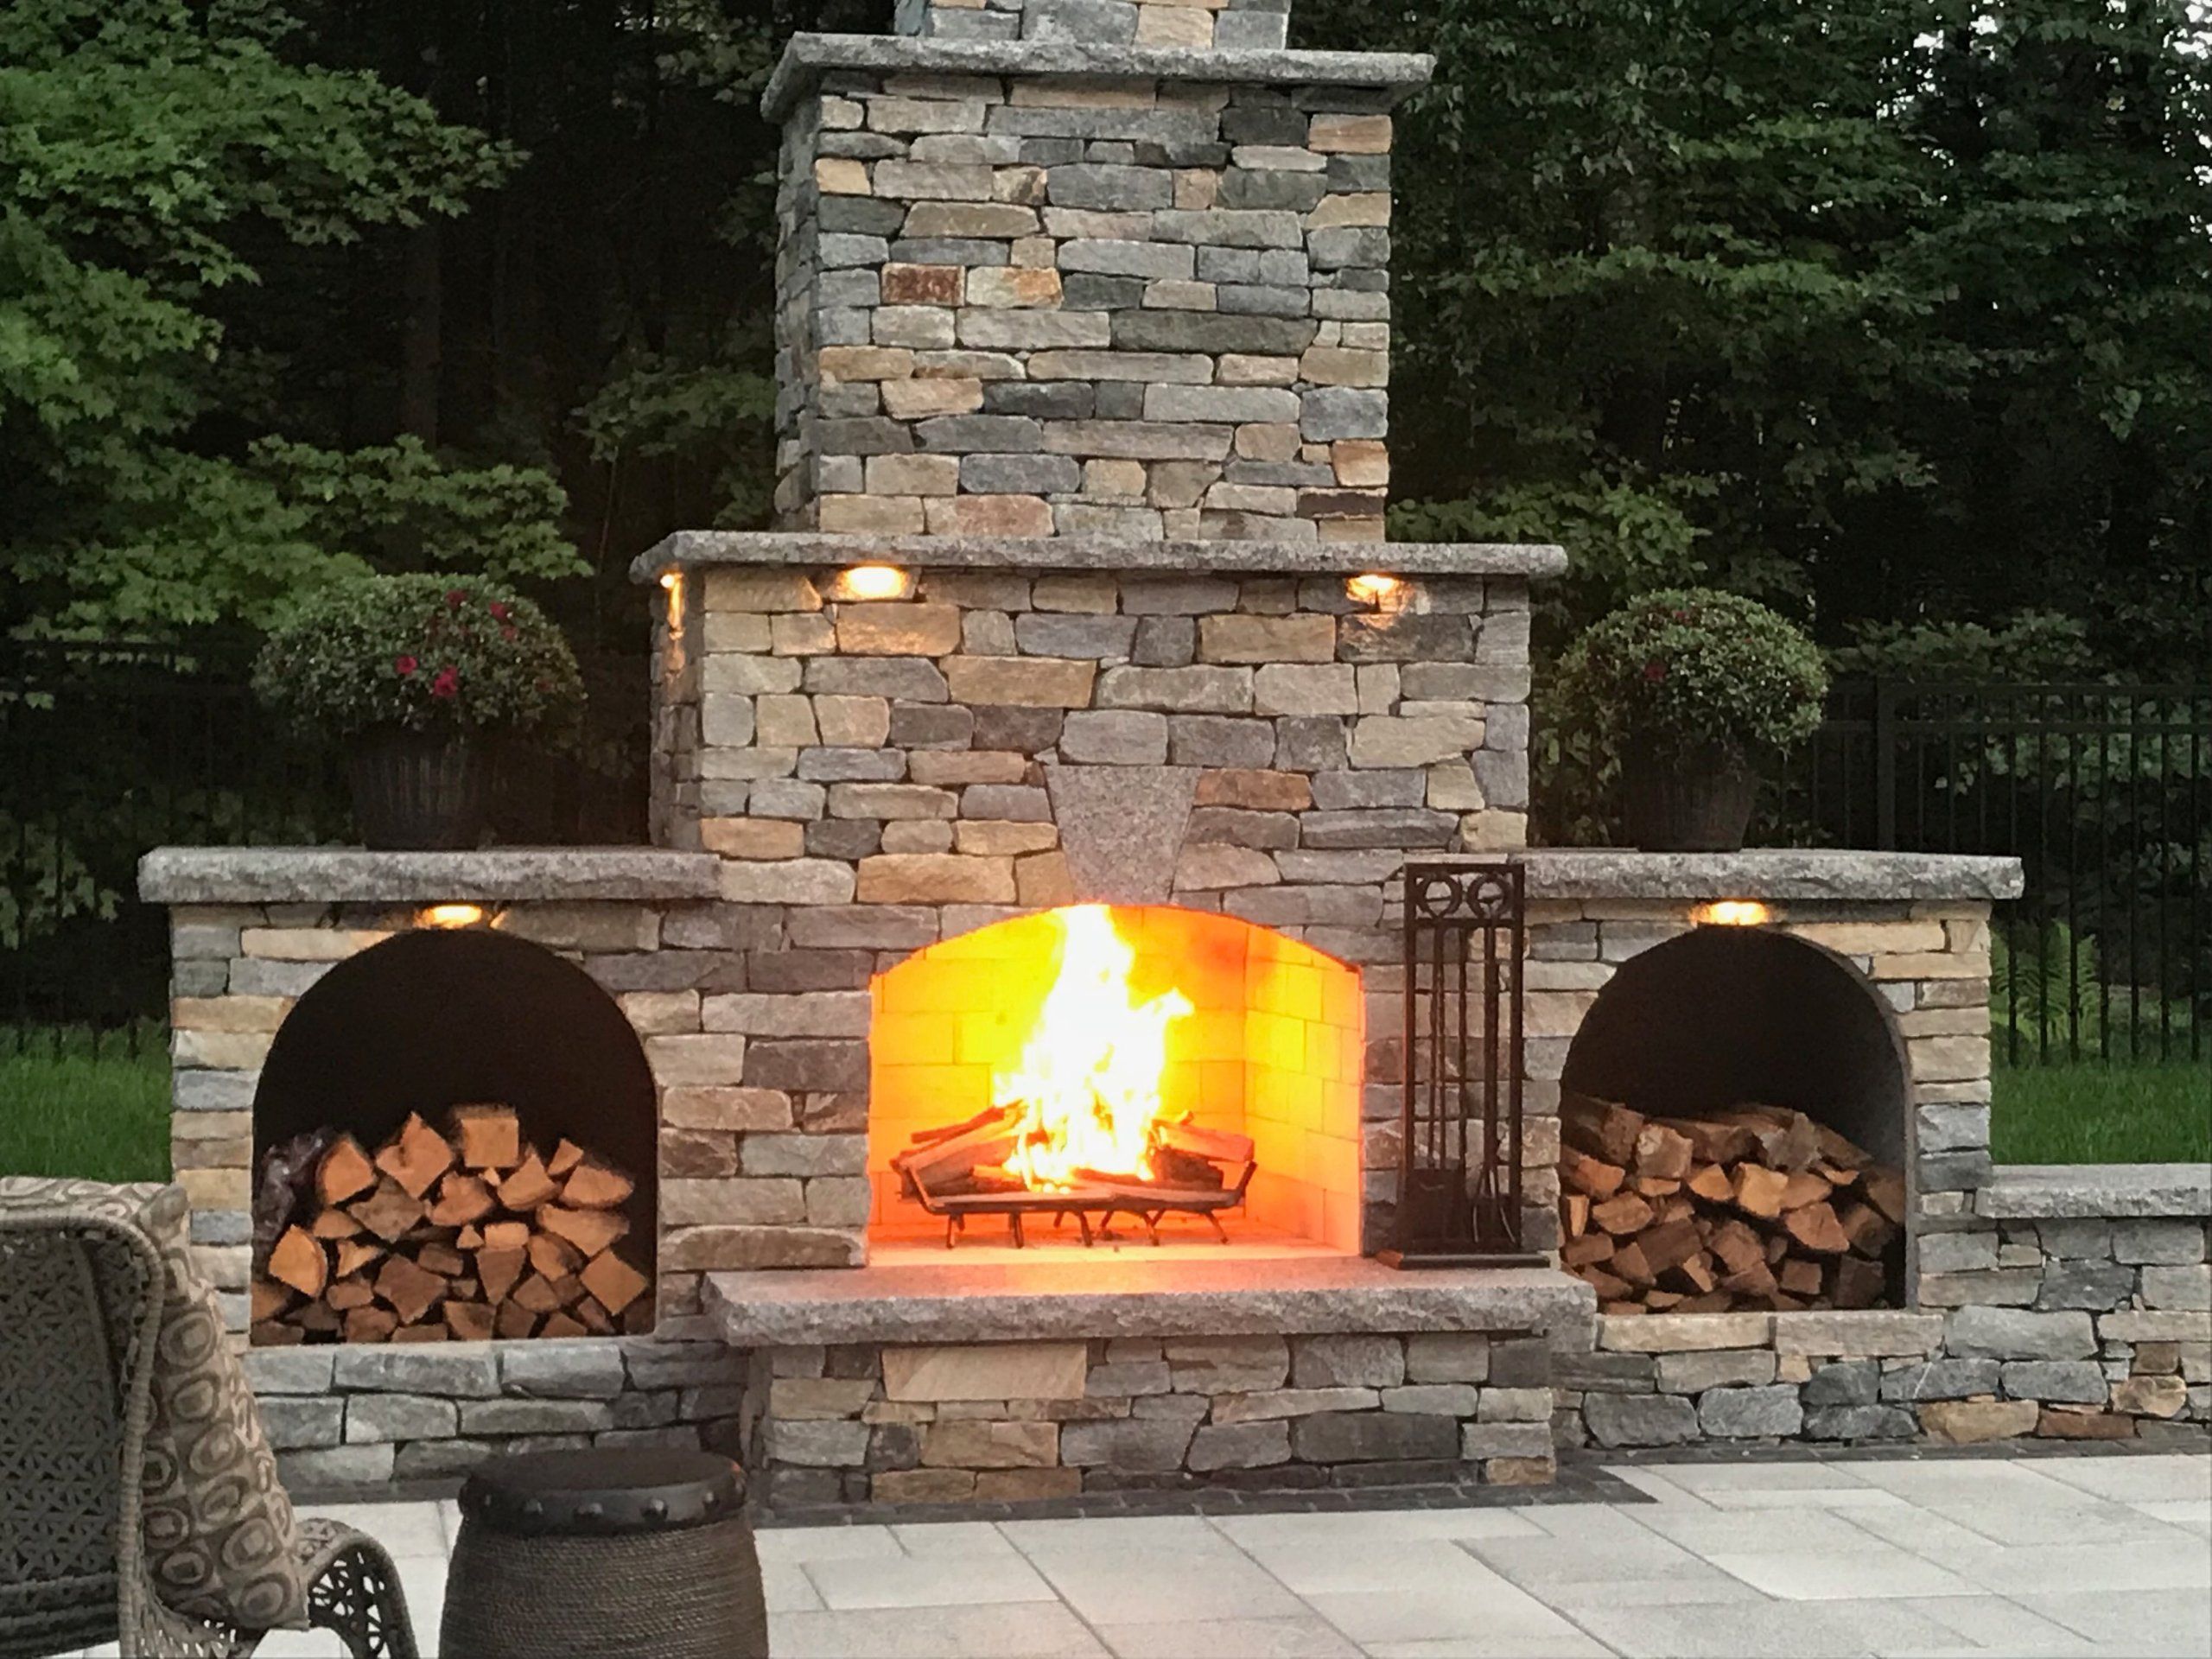 Project of the Week - Outdoor Fireplace - Massachusetts - May 2, 2019 - Stone Age Manufacturing -   17 diy Outdoor fireplace ideas